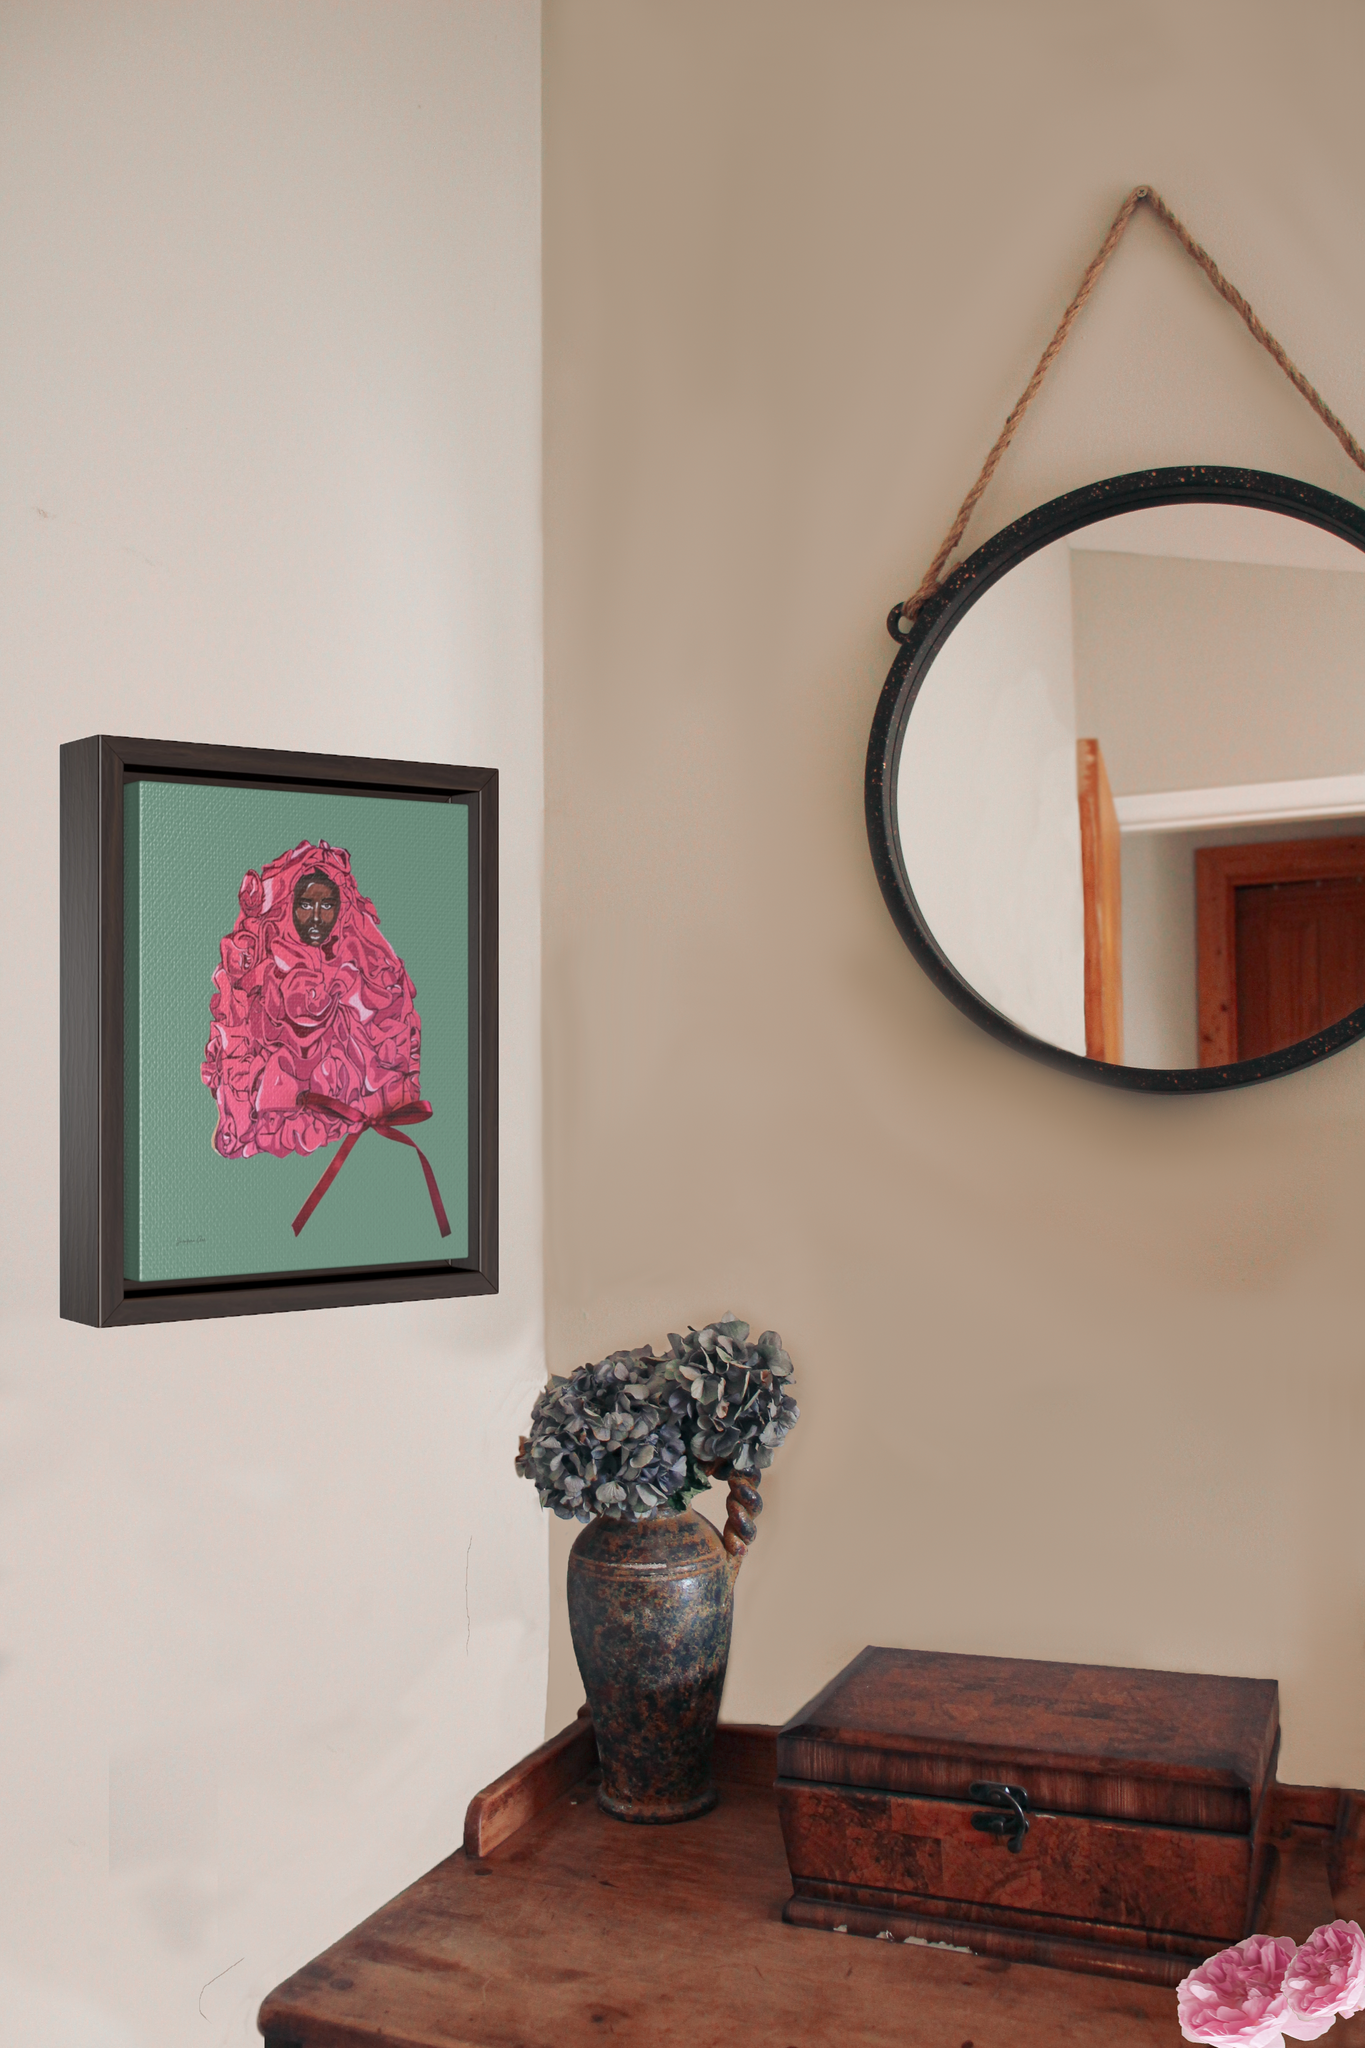 A framed gallery wrap canvas, with an illustration of model Adut Akech wearing a pink Valentino gown with a bow, with a mint green background, hanging on a wall next to a desk with a vase of flowers and a jewelry box